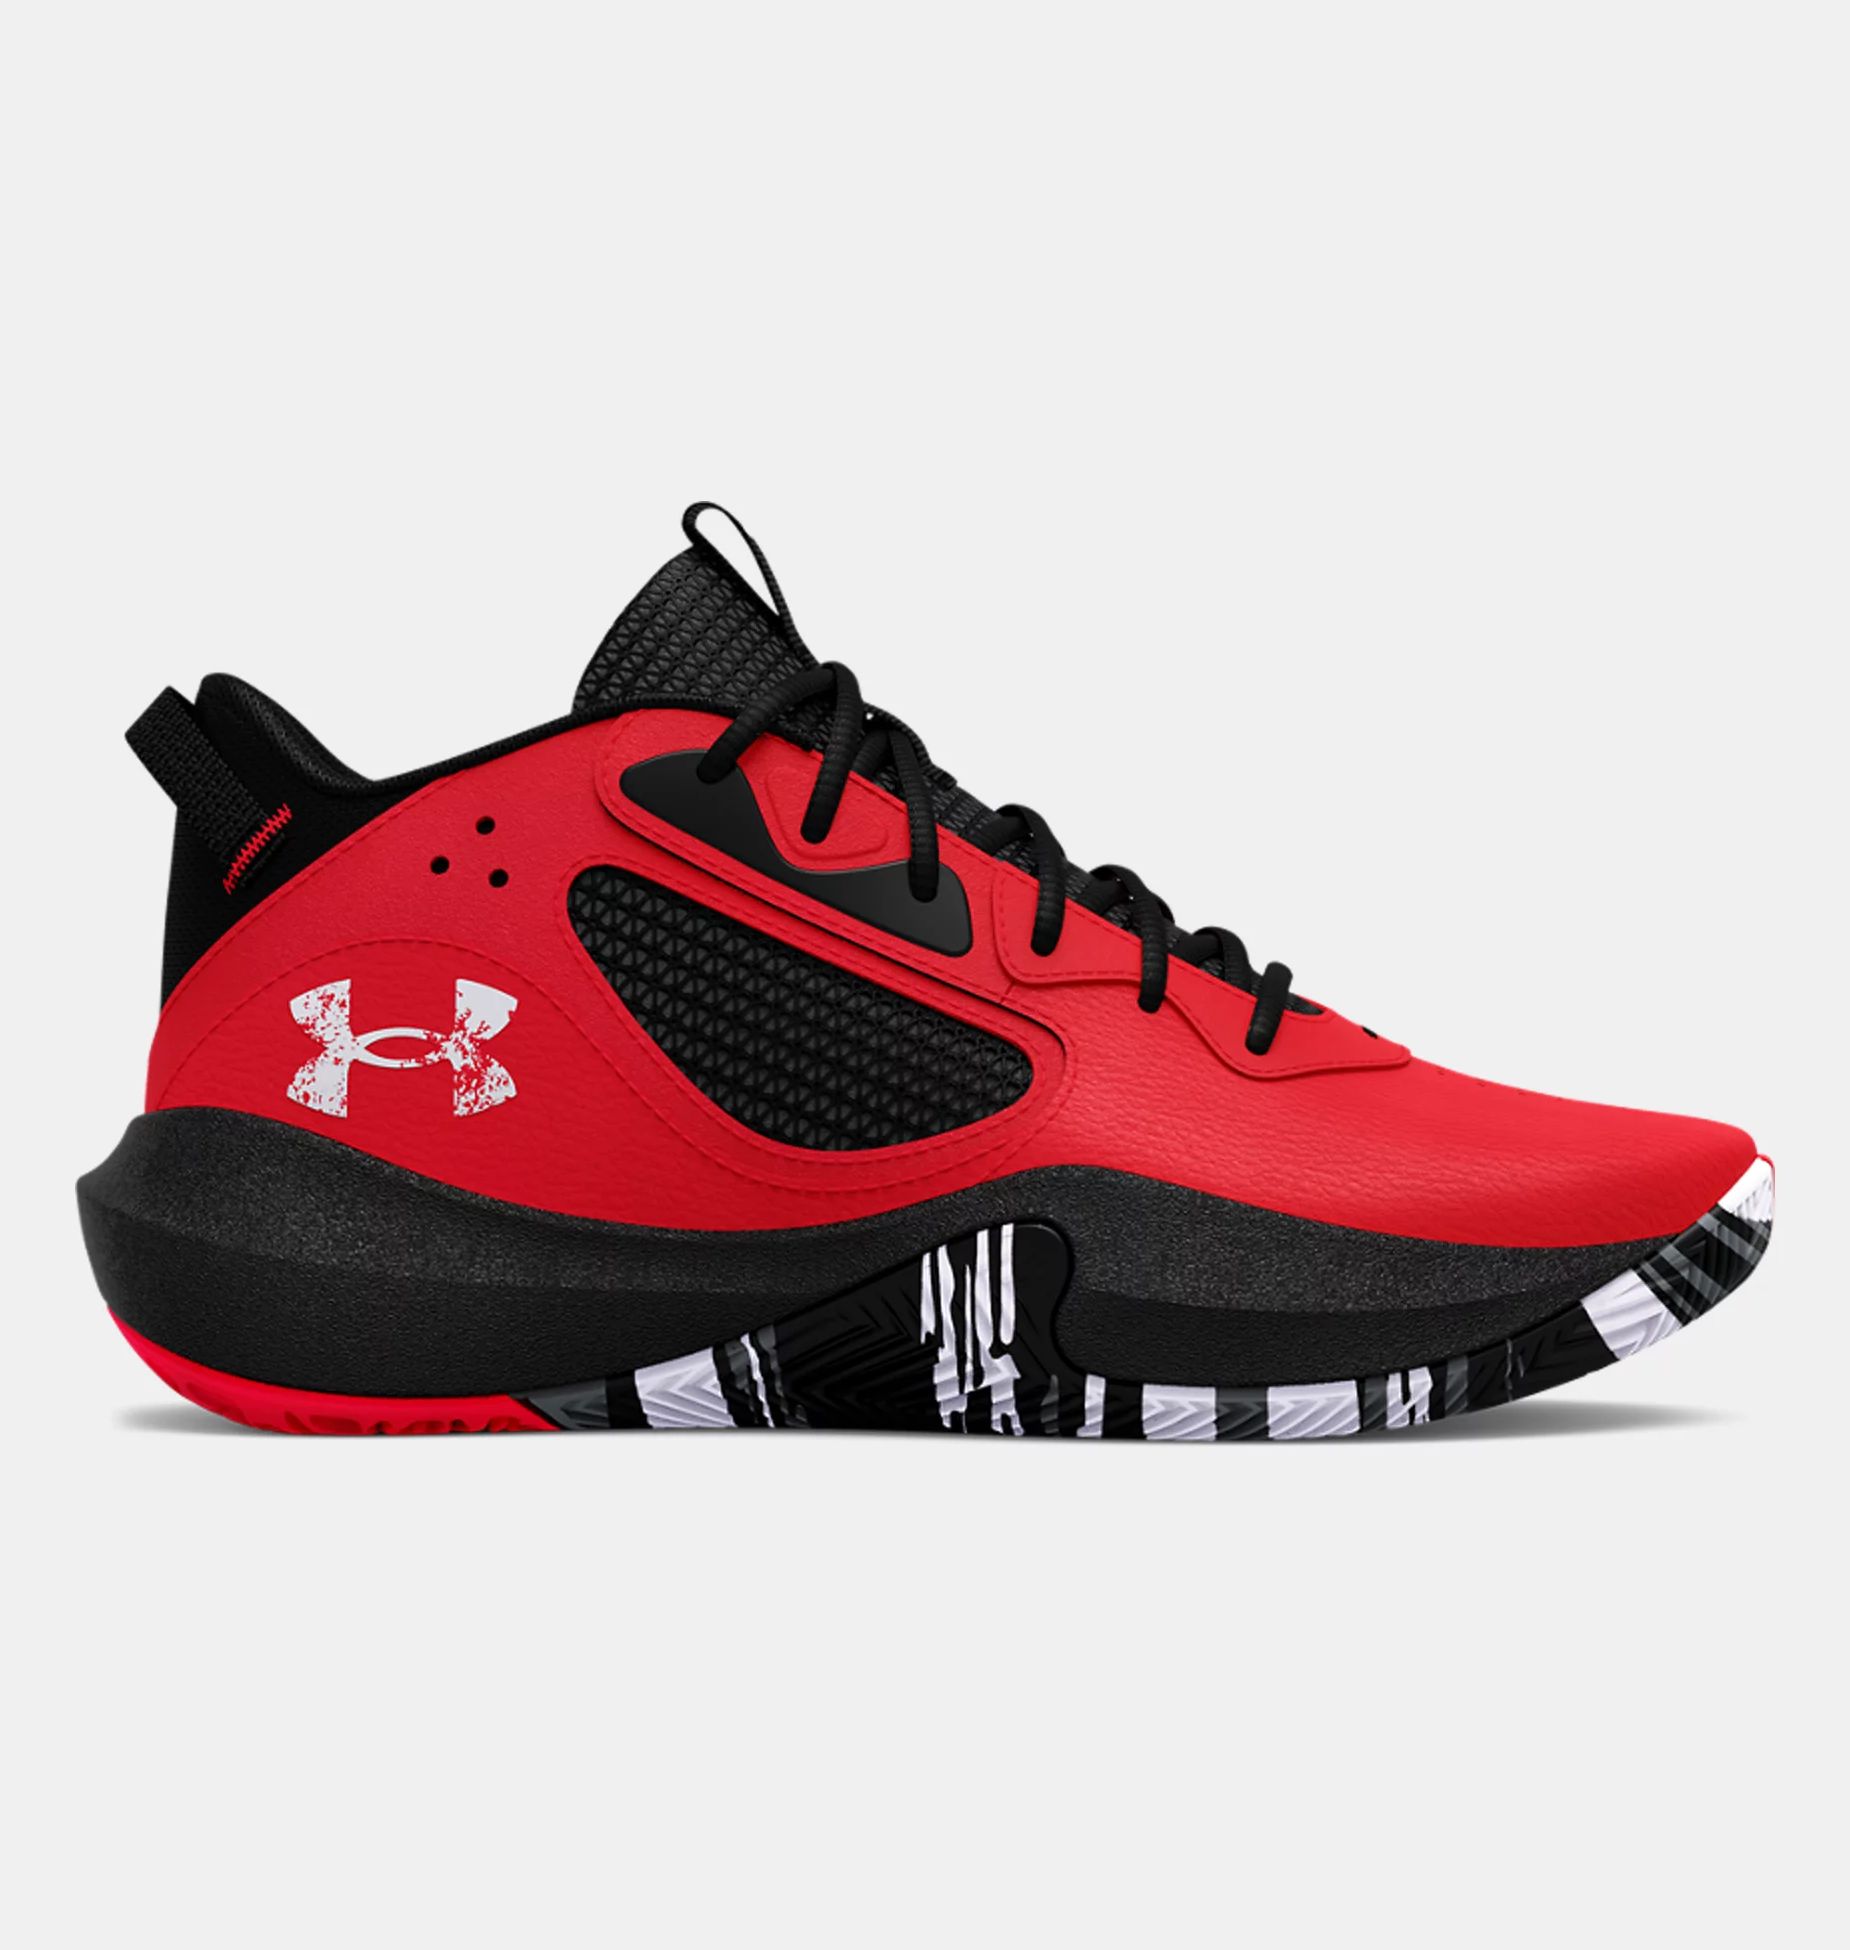 Shoes -  under armour Lockdown 6 Basketball Shoes